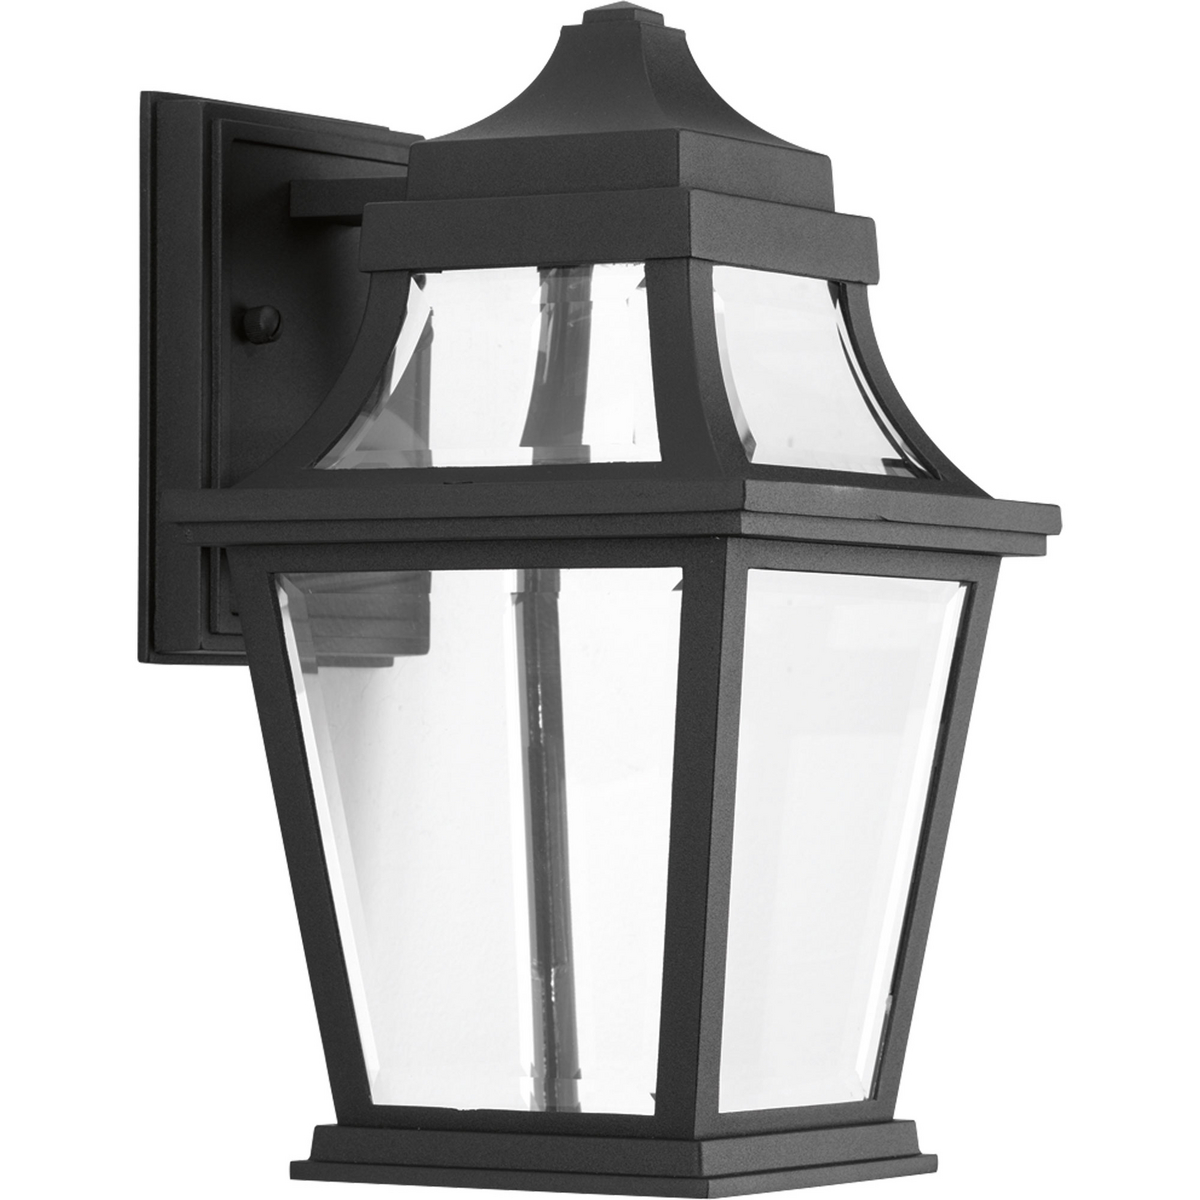 Endorse celebrates the traditional form of a gas-powered coach light with illumination from an LED source. A die-cast aluminum, powdered coated frame created and intriguing visual effect with the clear beveled glass. An optional fluted glass column is offered as an accessory (P8774-31). 3000K, 90+ CRI, 623 lumens (source).